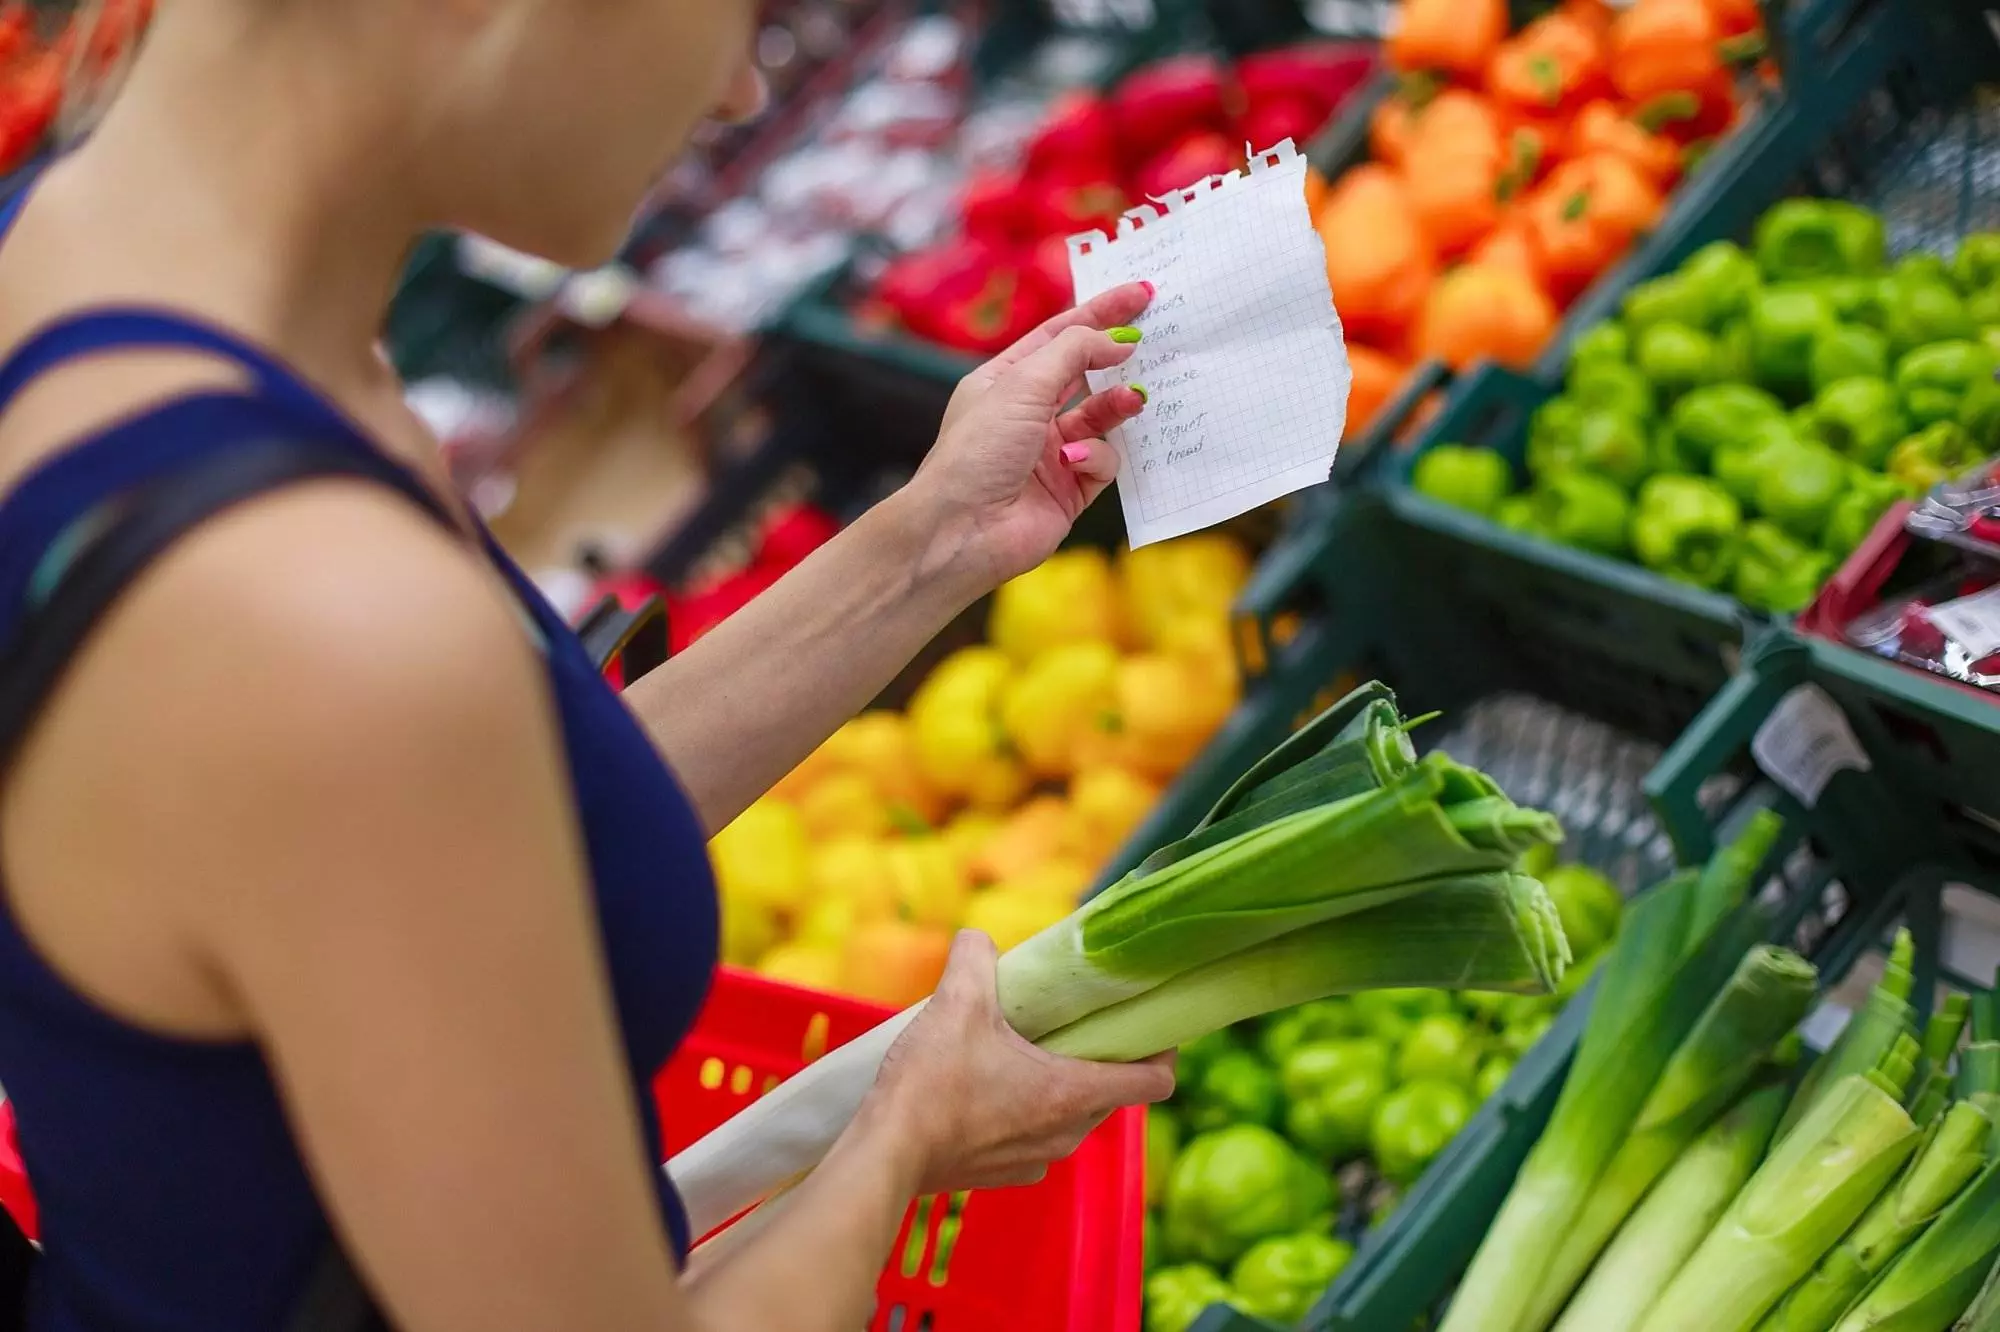 Woman checking shopping list in grocery store produce aisle.